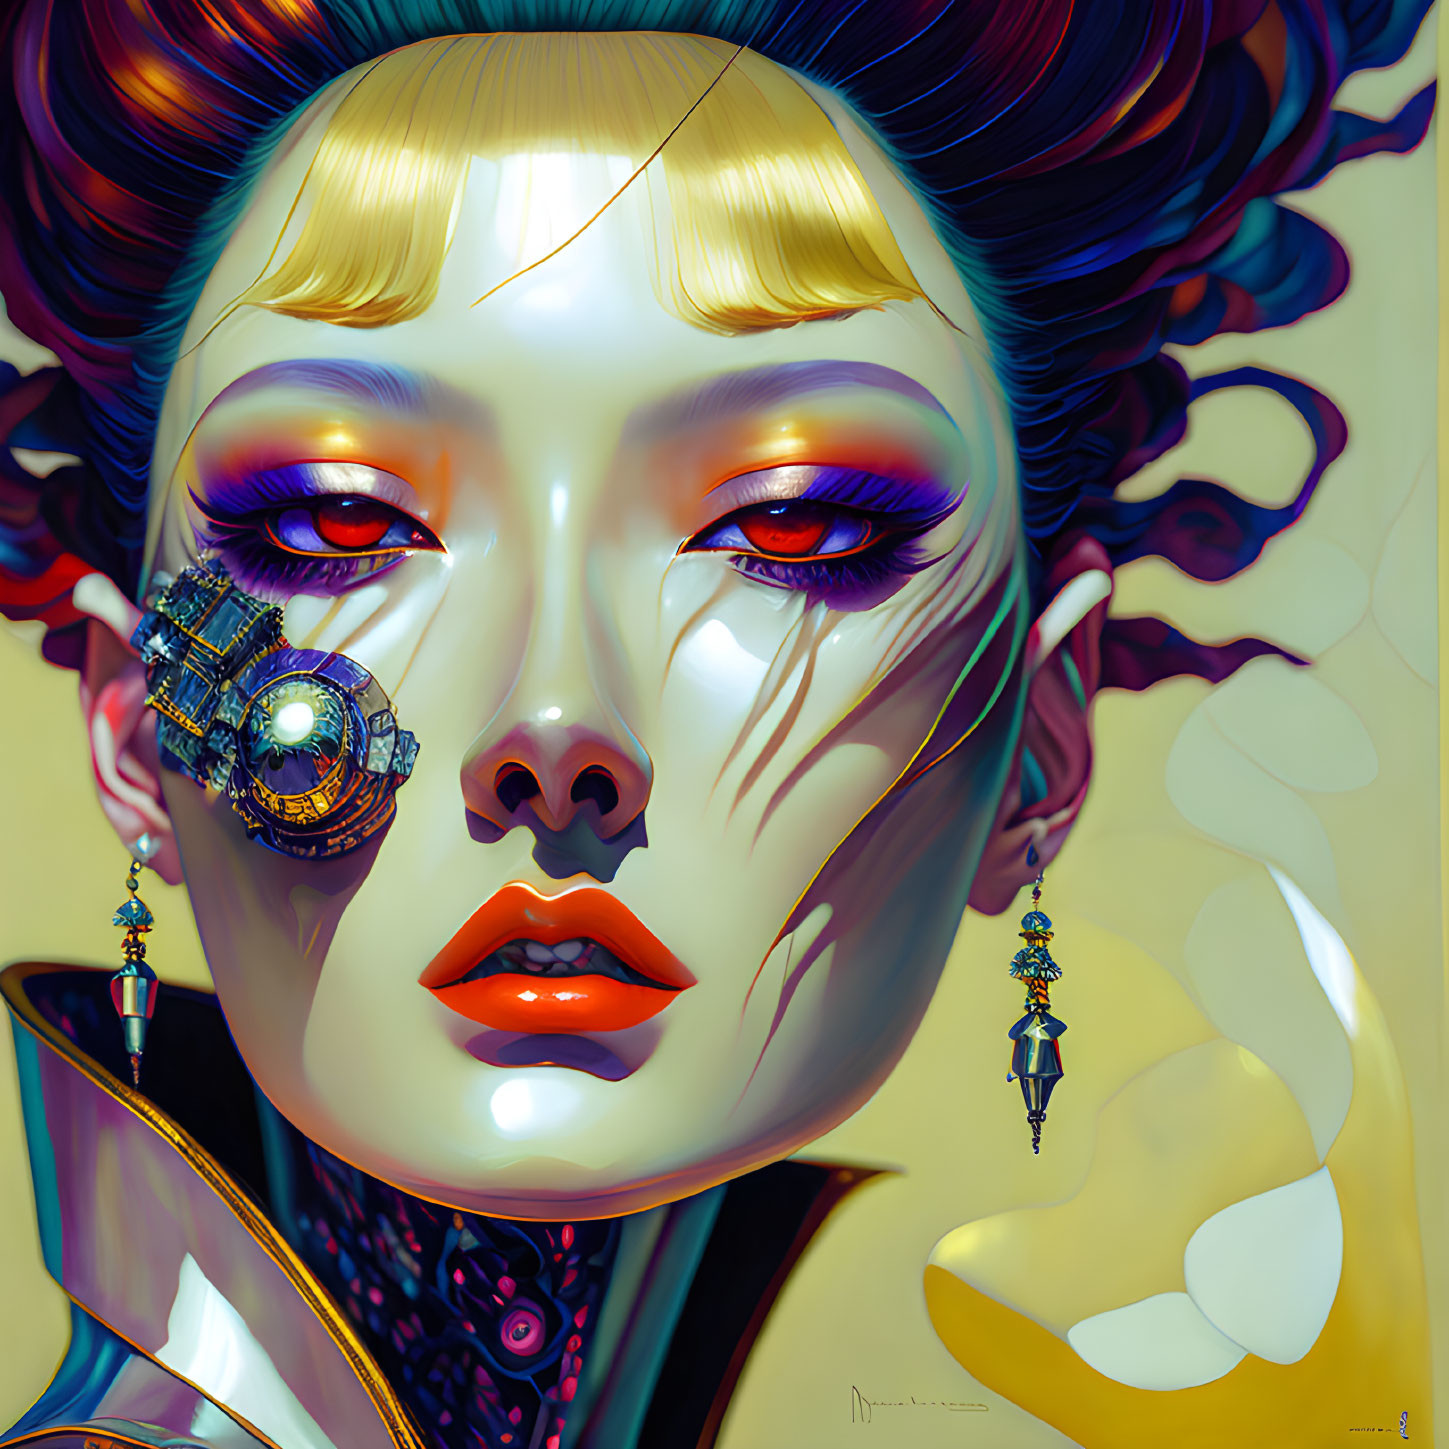 Elaborate Hair and Mechanical Eye in Portrait Against Golden Background